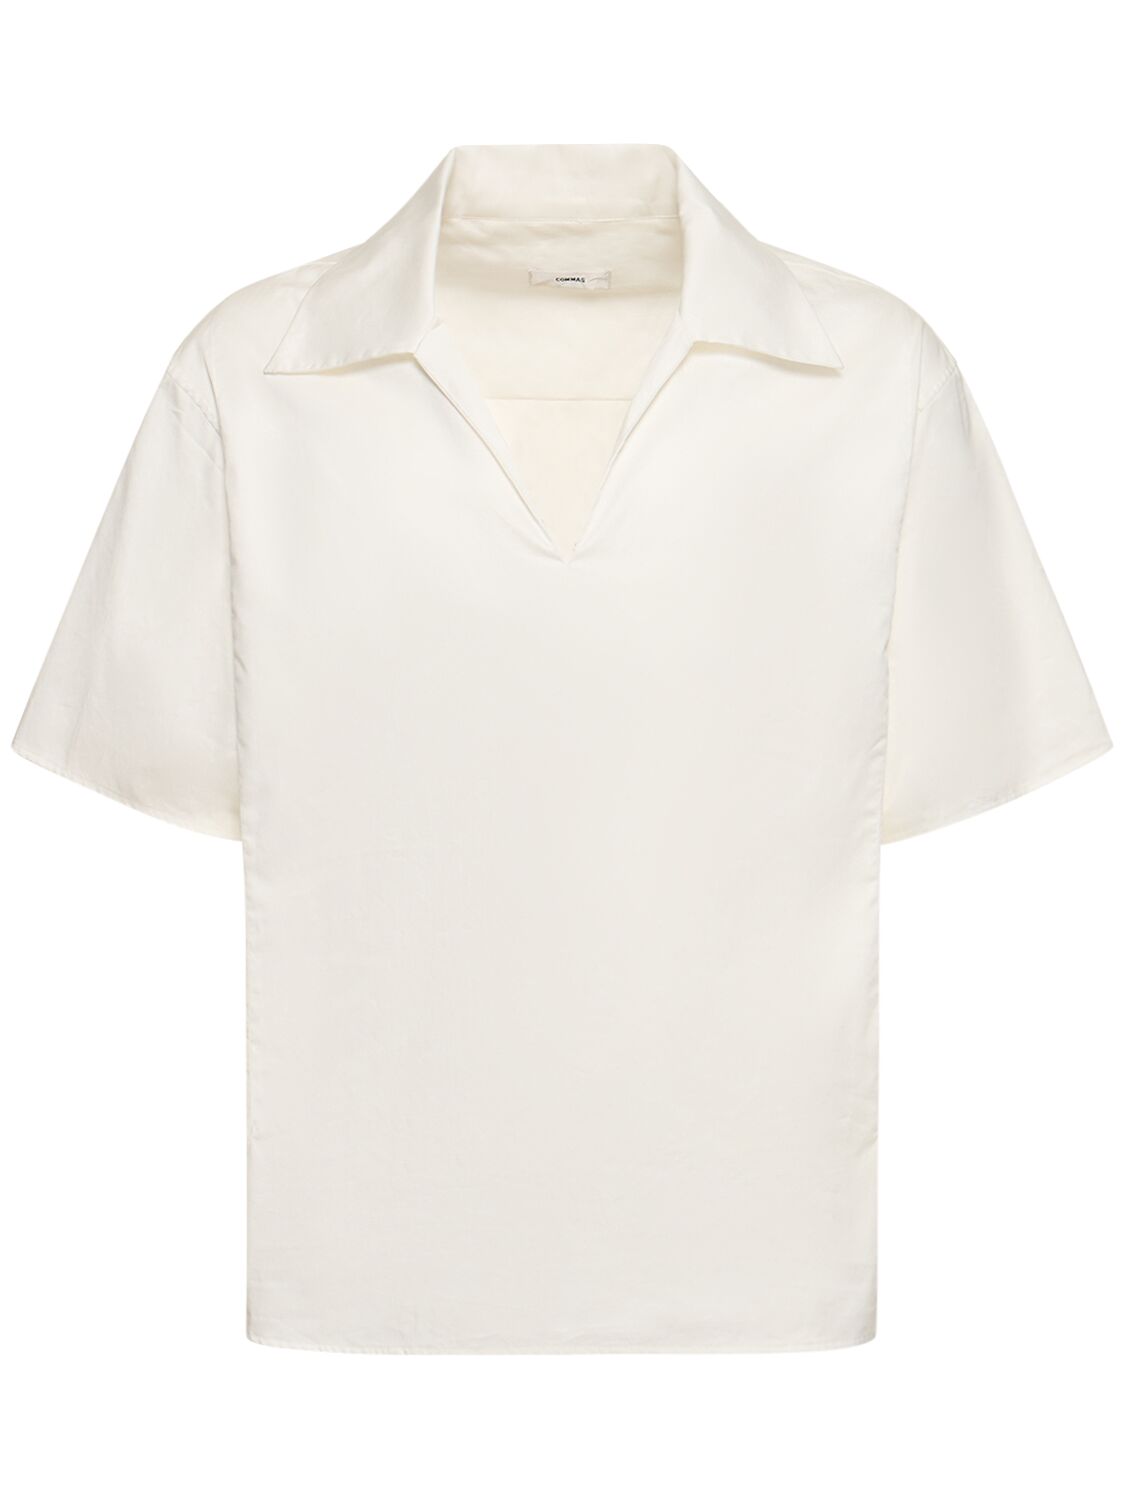 Commas Spread Collar S/s Boxy Fit Shirt In White